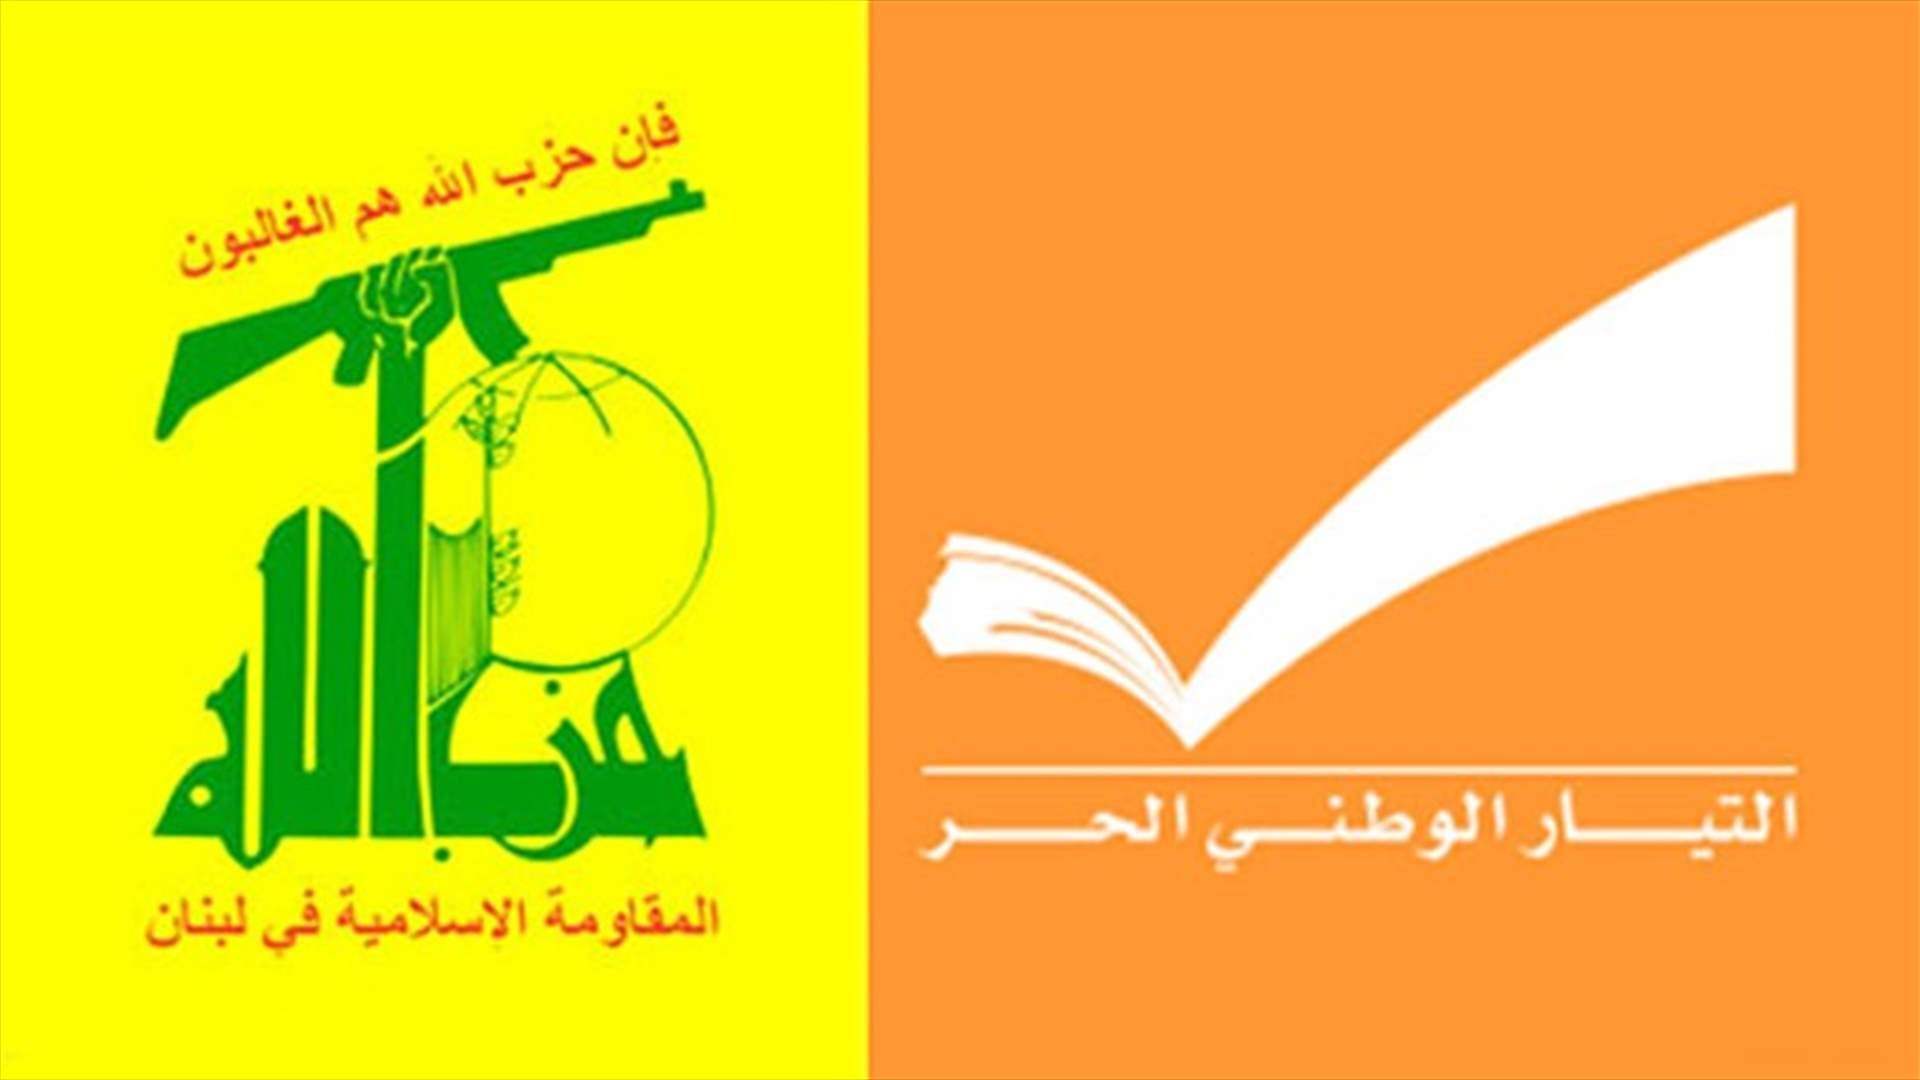 Hezbollah-FPM dialogue: Dropping preconditions